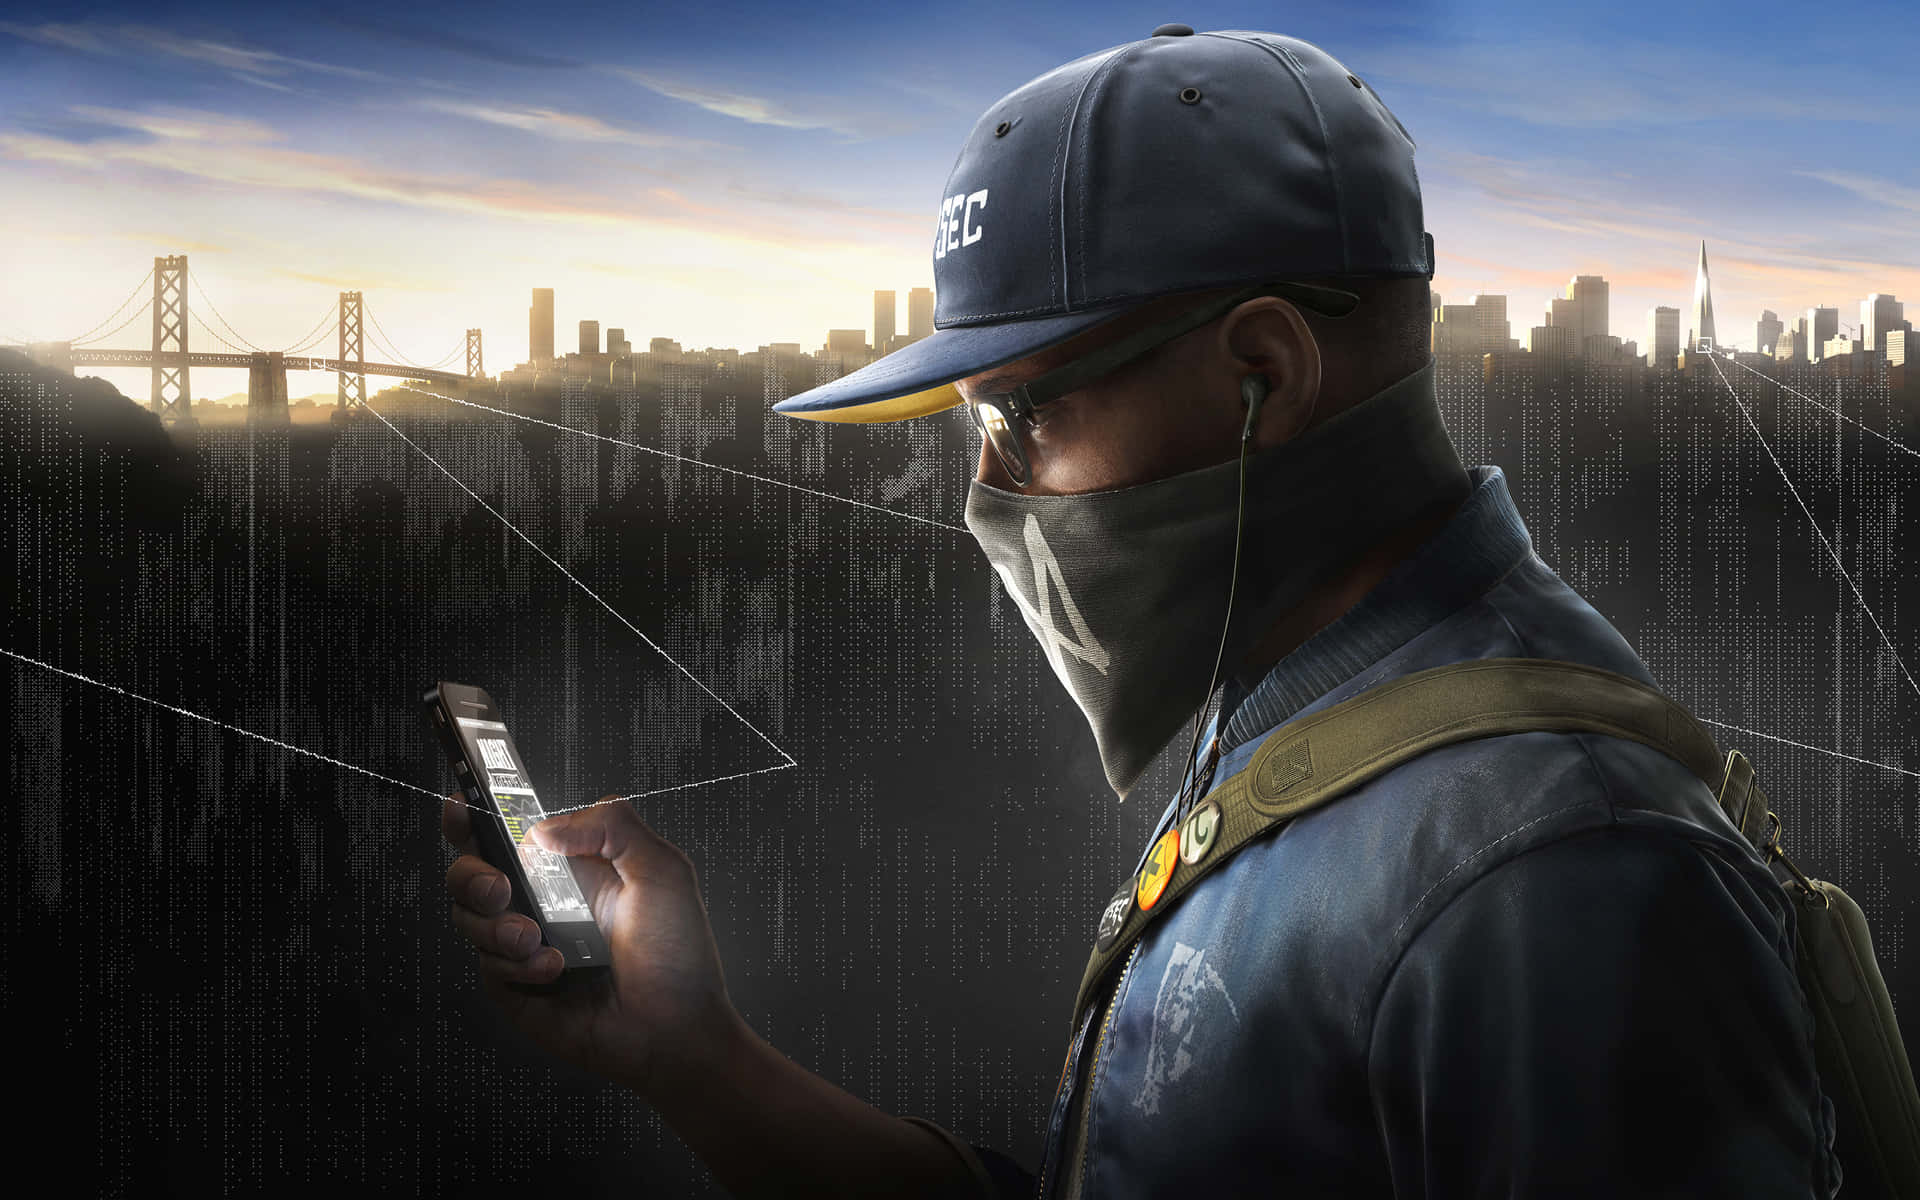 Play the highly-anticipated Watch Dogs game and hack your way through the city Wallpaper